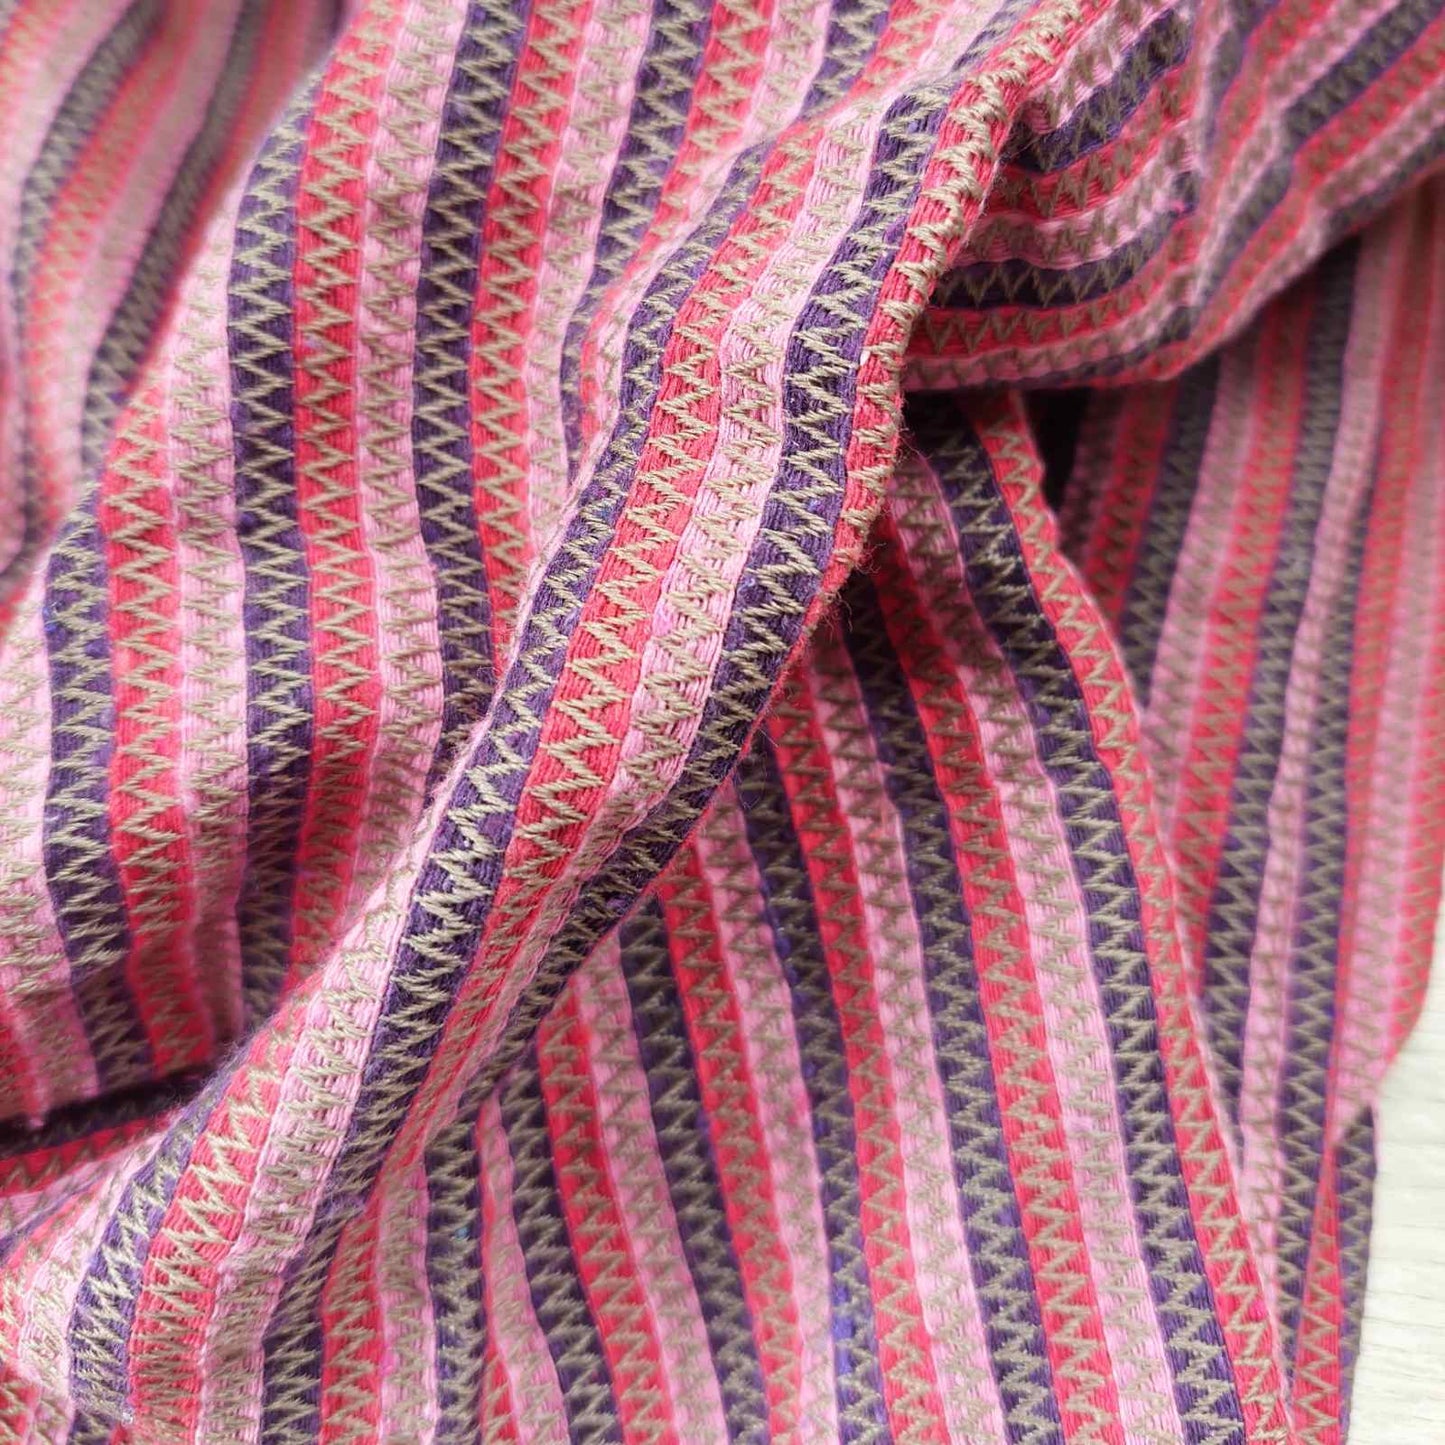 Recycled Fabric - Pink, purple & red stripes